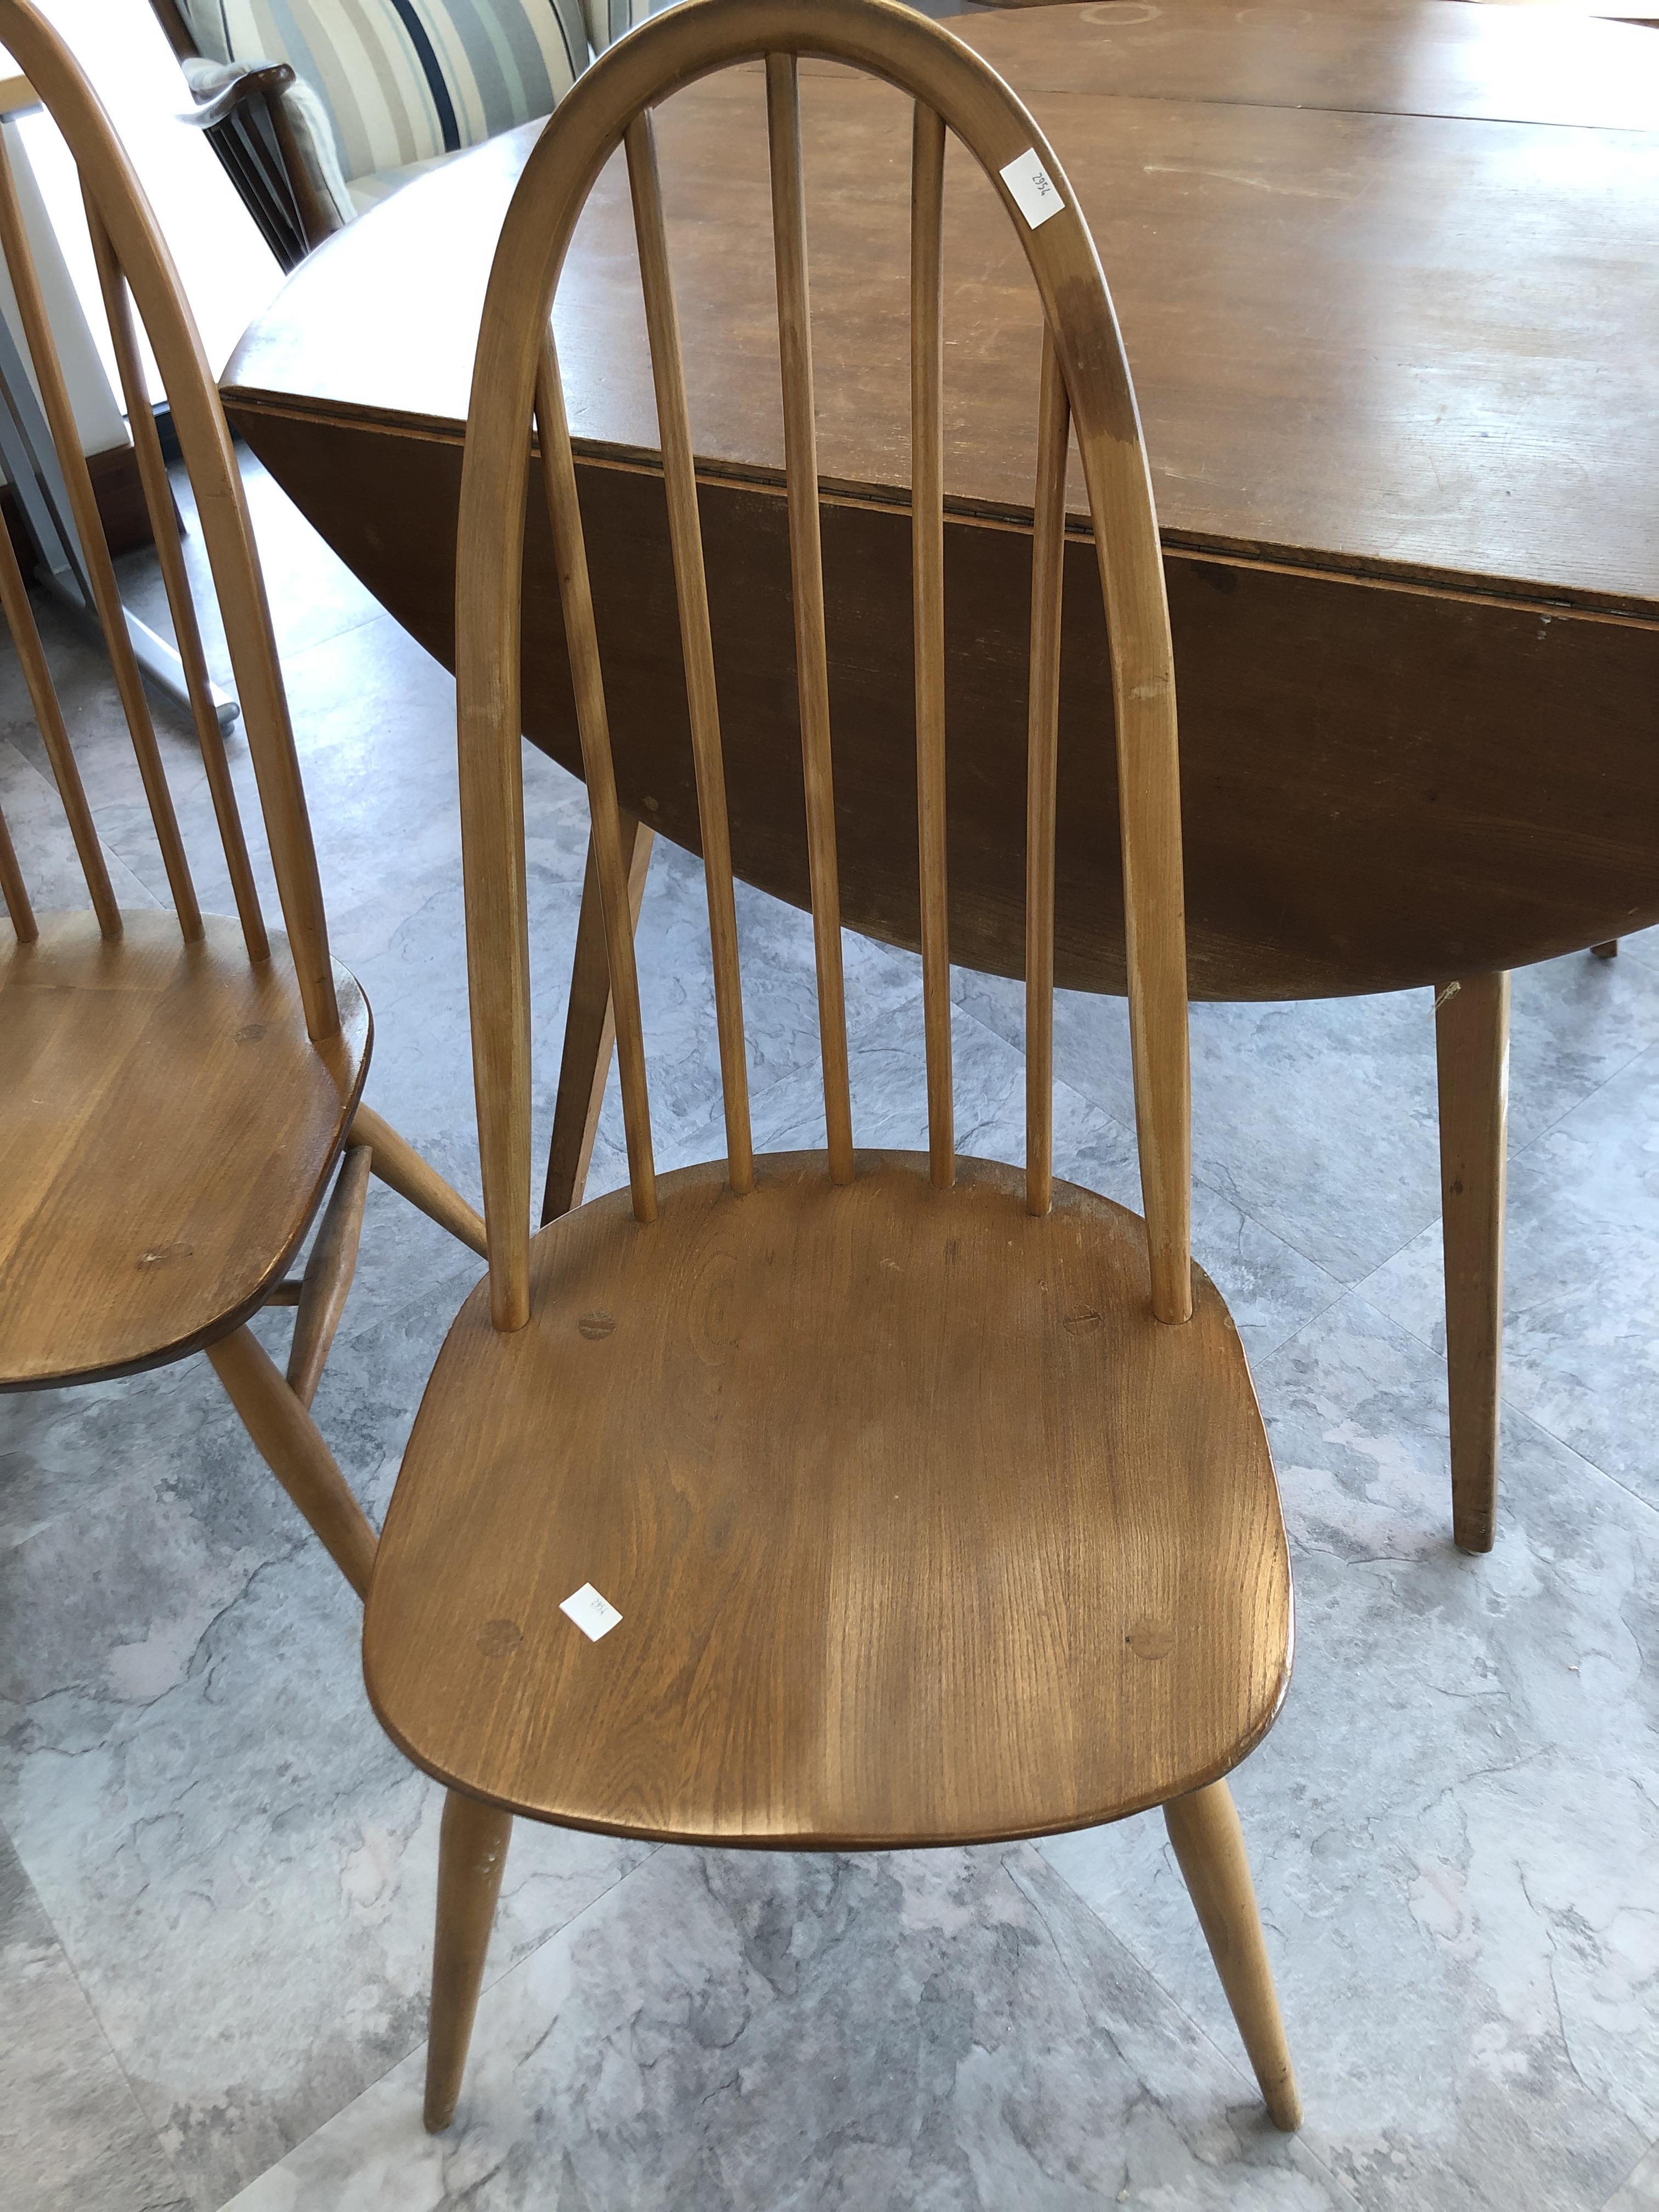 Ercol drop leaf table, height 71cm width 114cm depth 63cm, and a matching pair of Ercol chairs. - Image 2 of 4